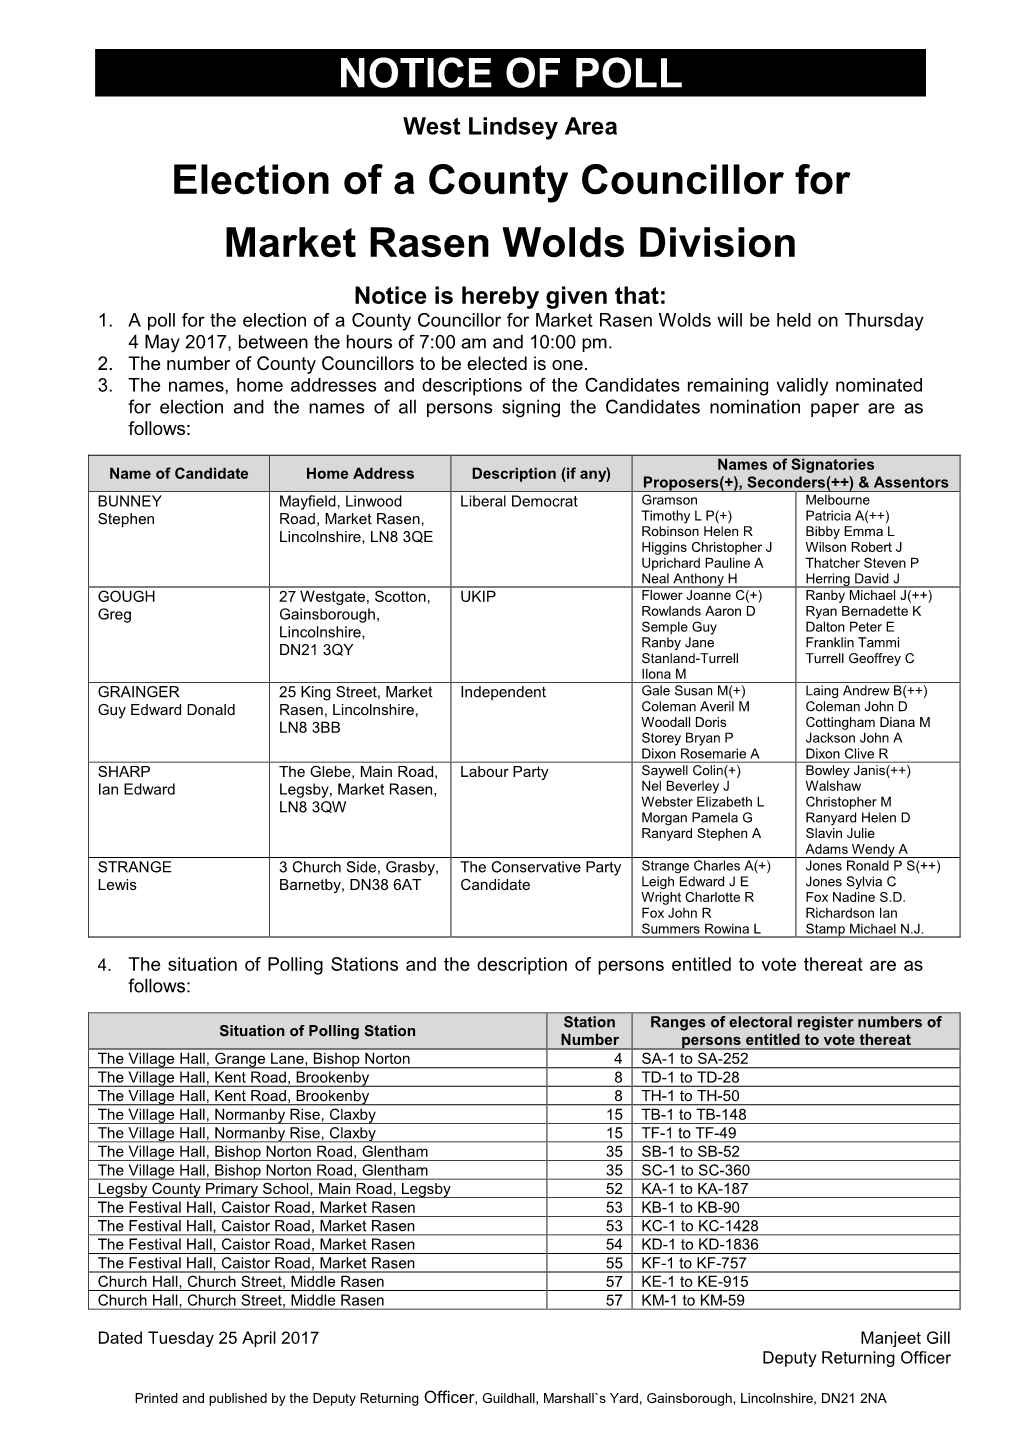 NOTICE of POLL West Lindsey Area Election of a County Councillor for Market Rasen Wolds Division Notice Is Hereby Given That: 1